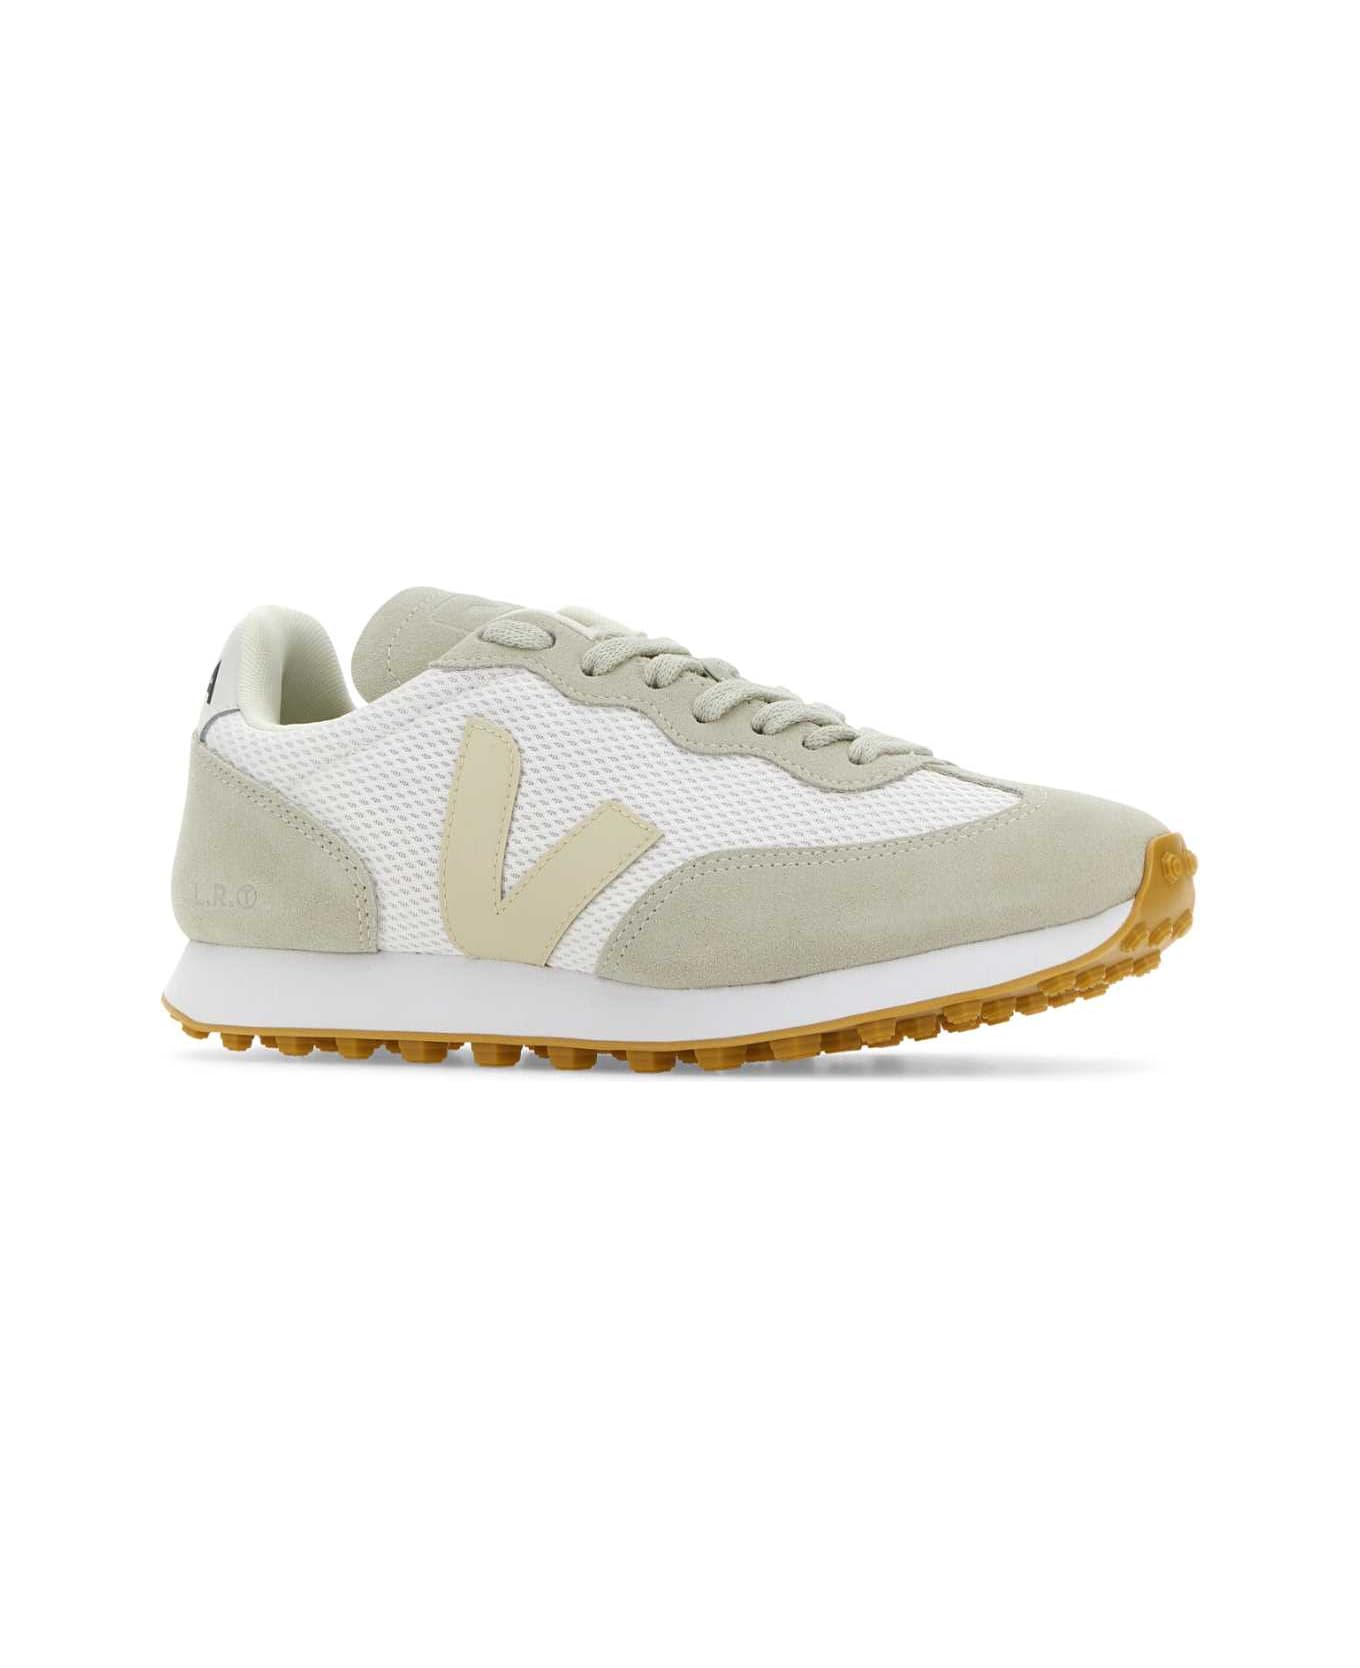 Veja Two-tones Polyester And Suede Rio Branco Sneakers - WHITEPIERRENATURAL